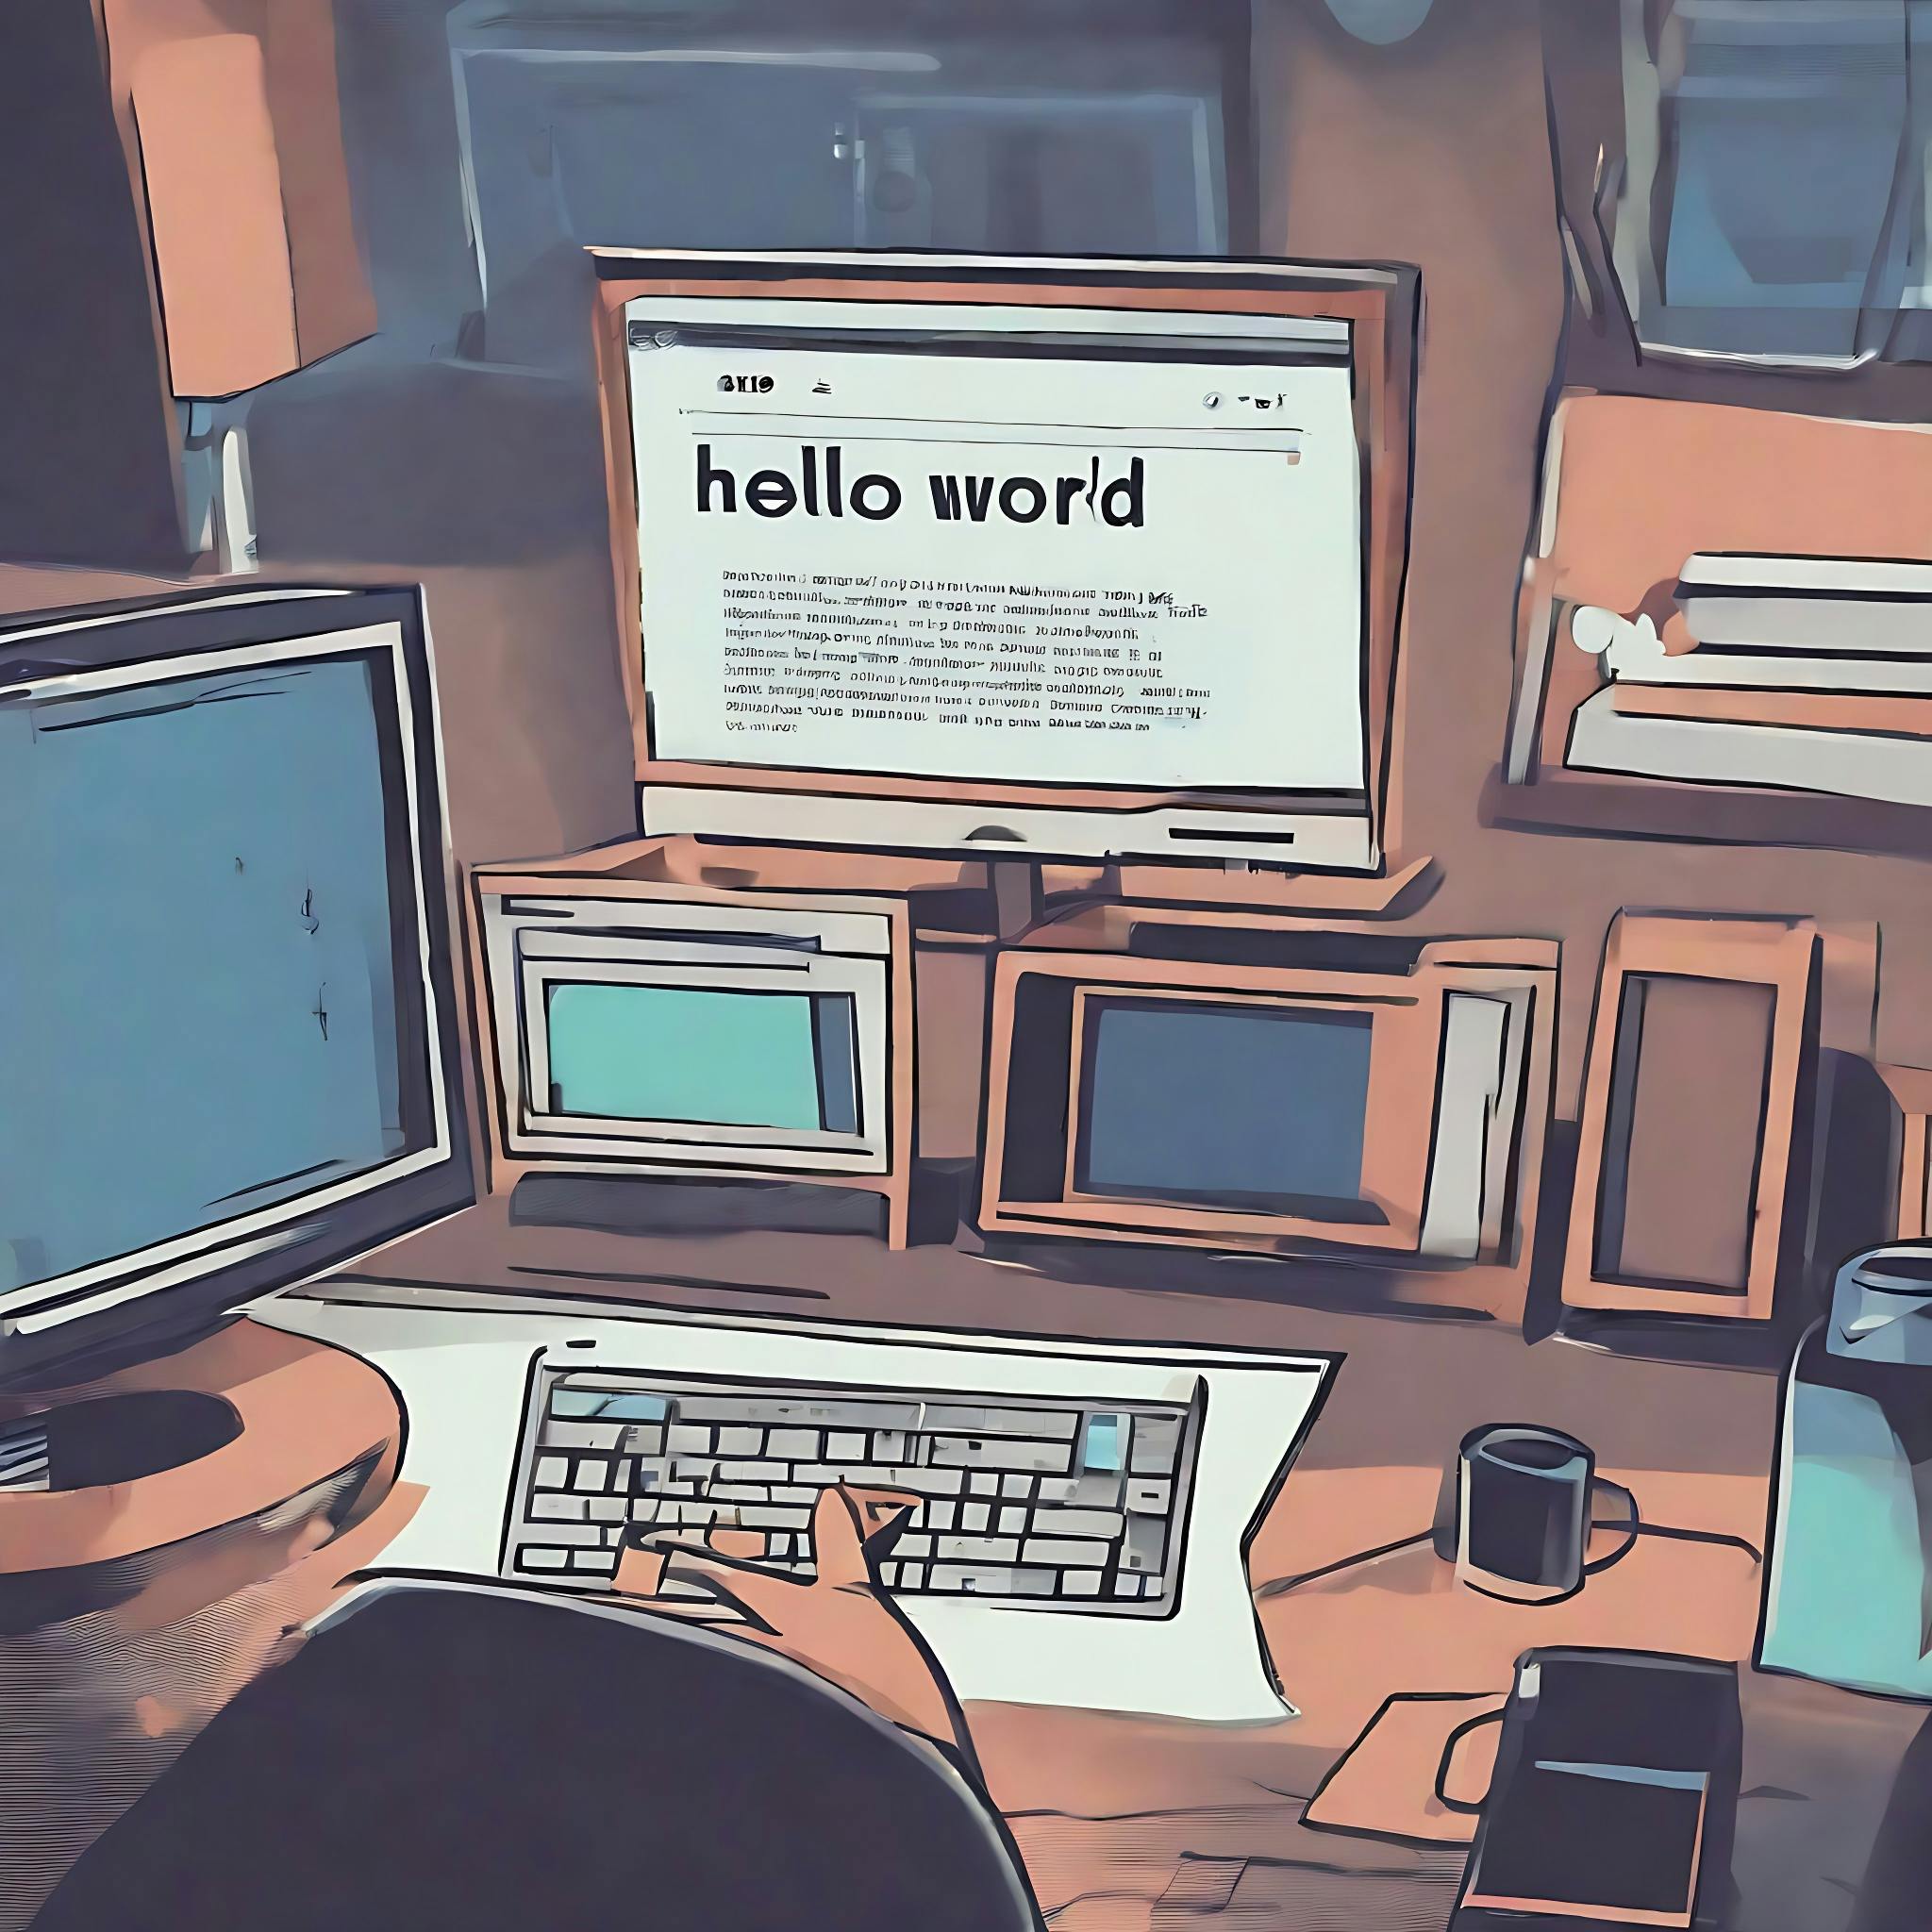 The original cover of this blog post showing some computers, a screen showing "hello world", a keyboard, a cup of coffee, etc.